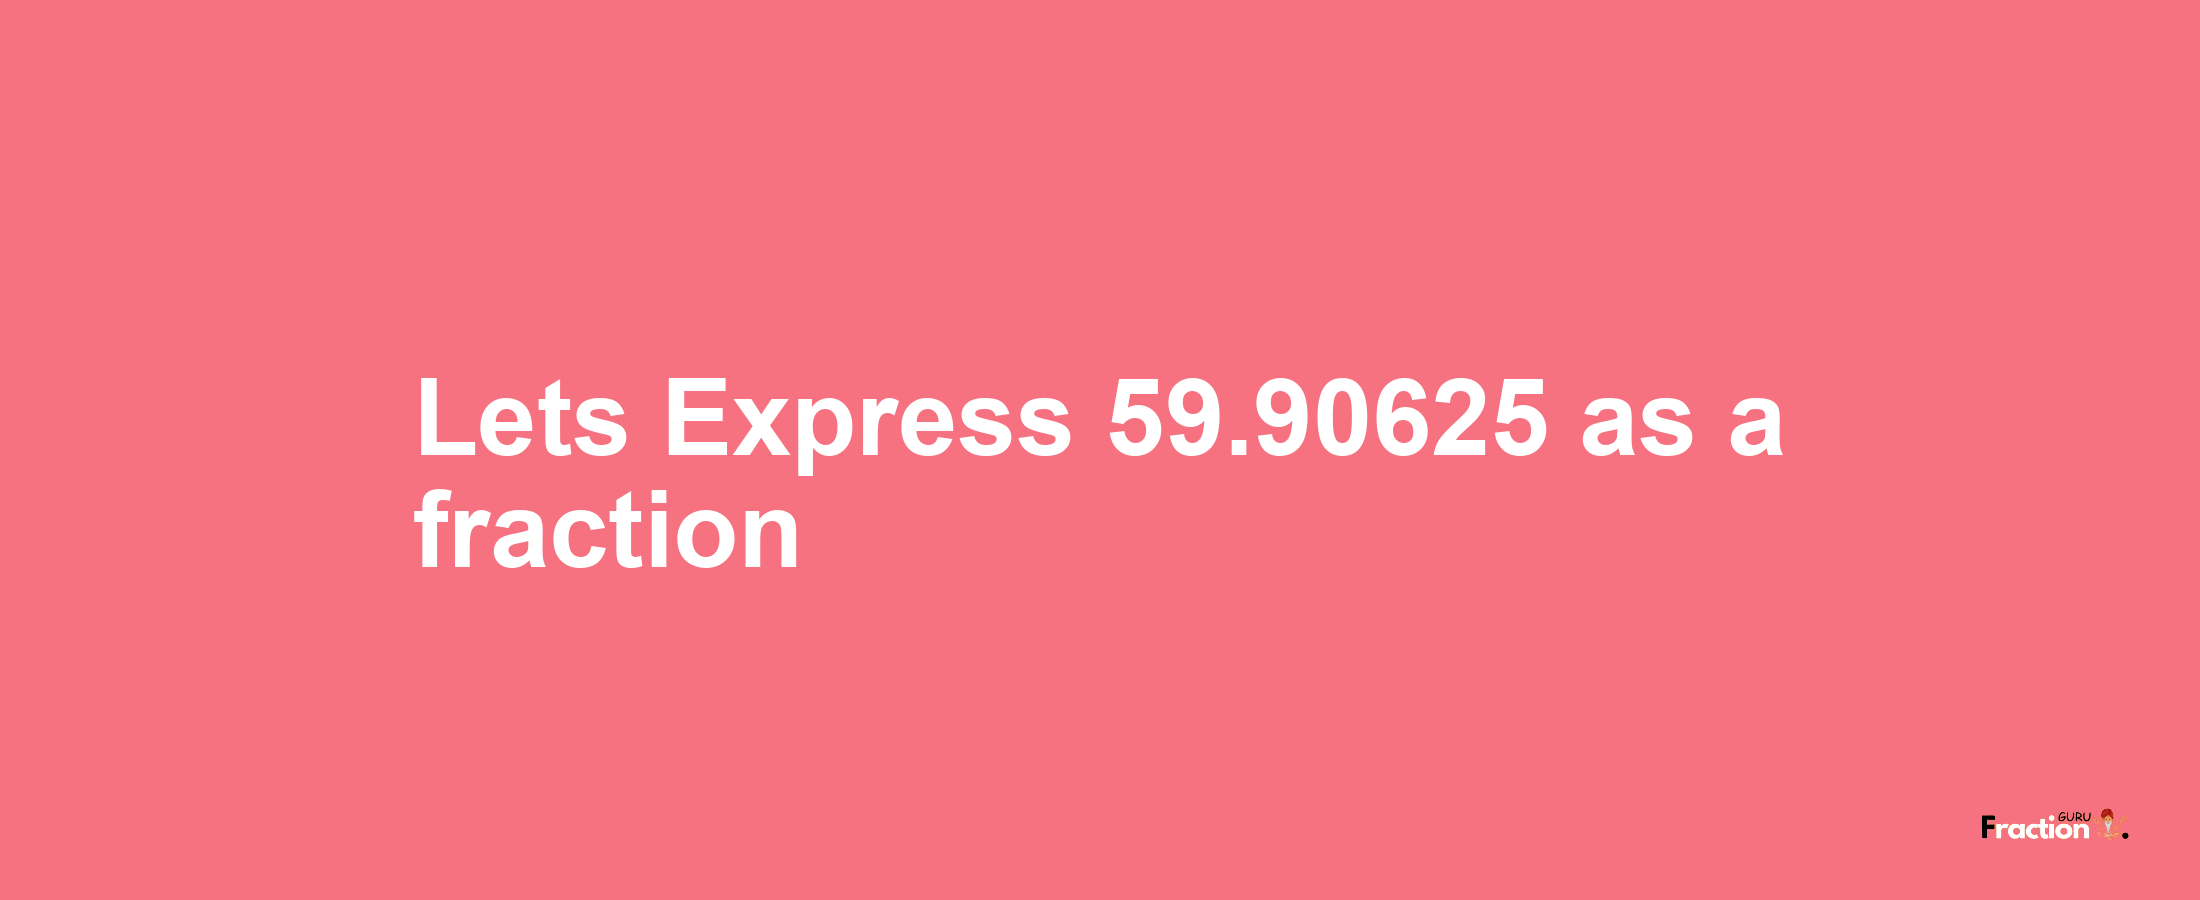 Lets Express 59.90625 as afraction